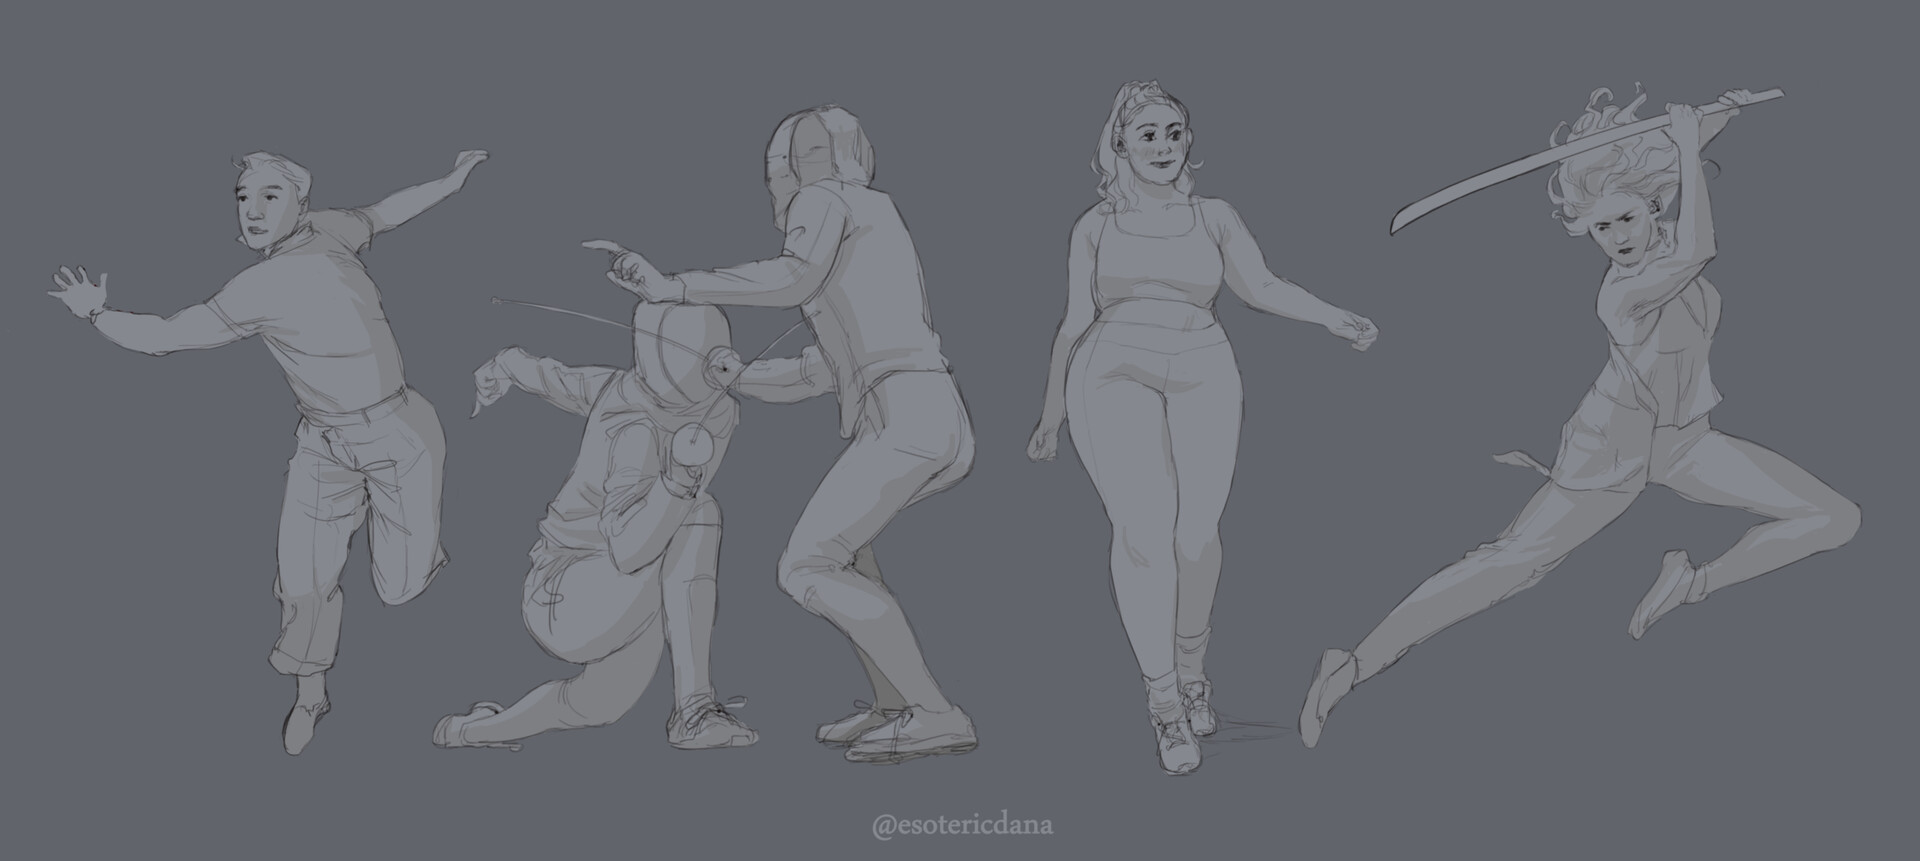 SenshiStock Sketch: Practice Drawing from Random Poses! | Model poses,  Human poses reference, Action pose reference